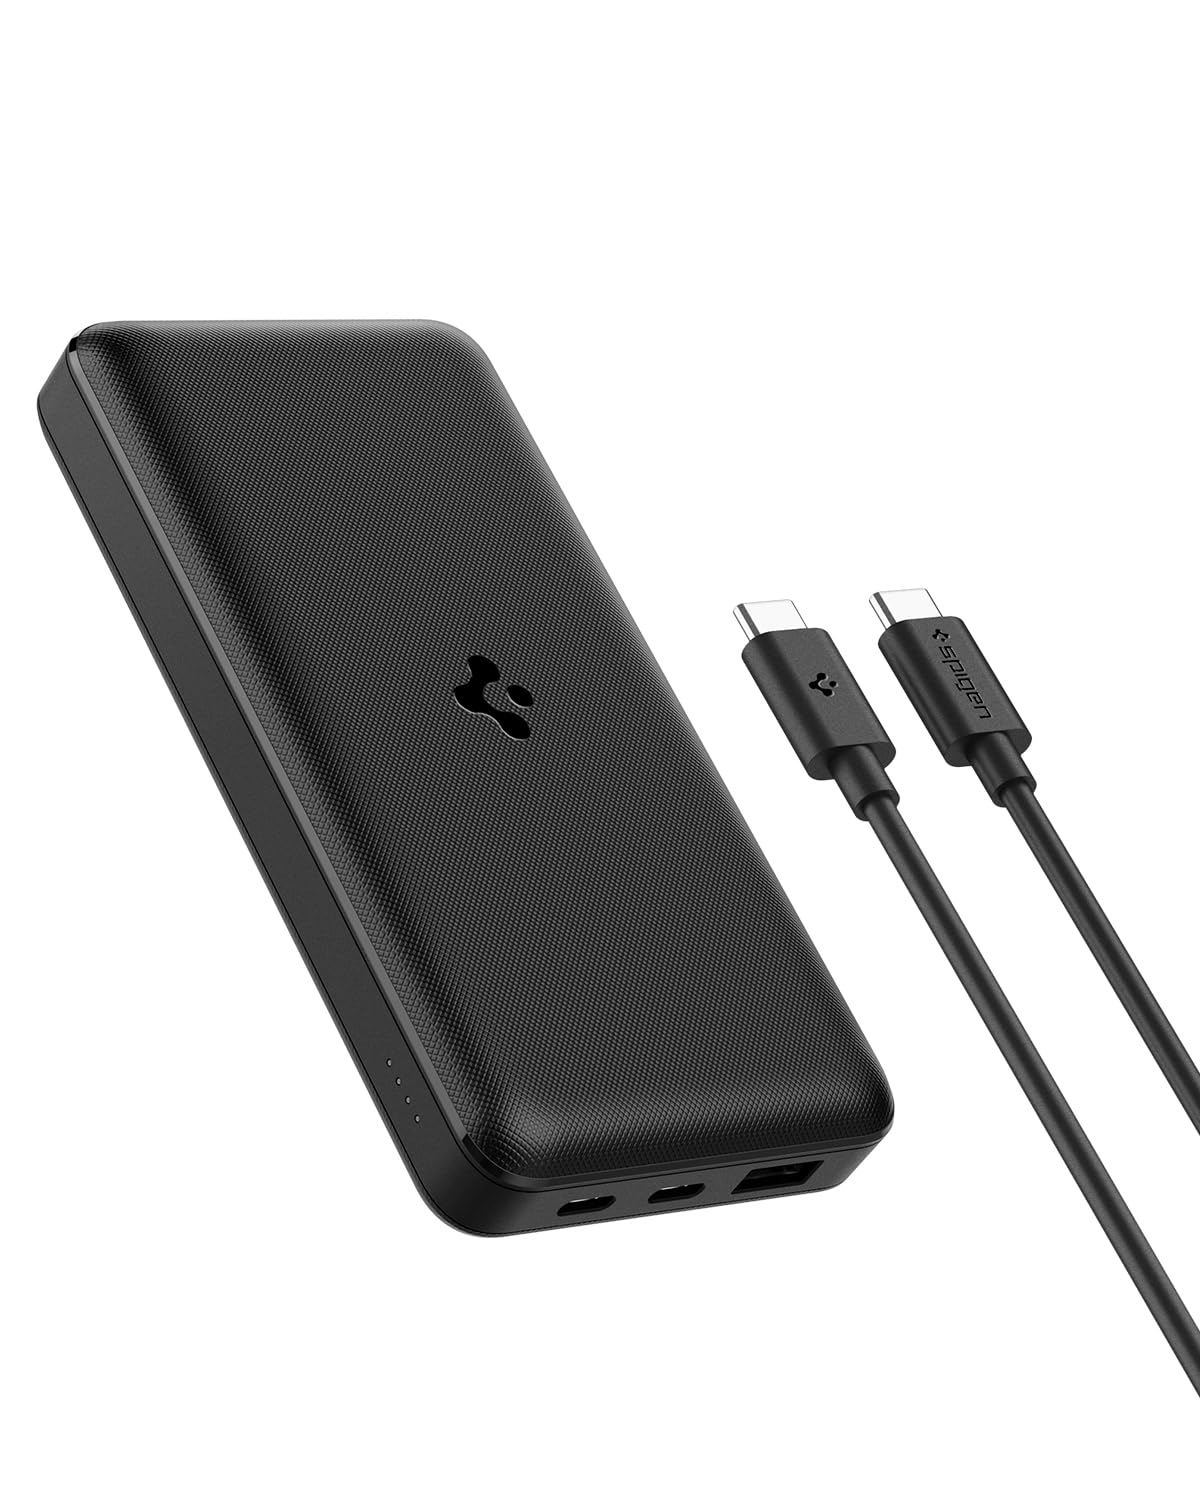 (Open Box) Spigen 20000 mAh, 30W Fast Charging Power Bank for MacBook Pro with 30W for 2 USB-C Ports, 22.5W for 1 USB-A Port, Included USB-C to USB-C Cable - Black  (Grade - A+)